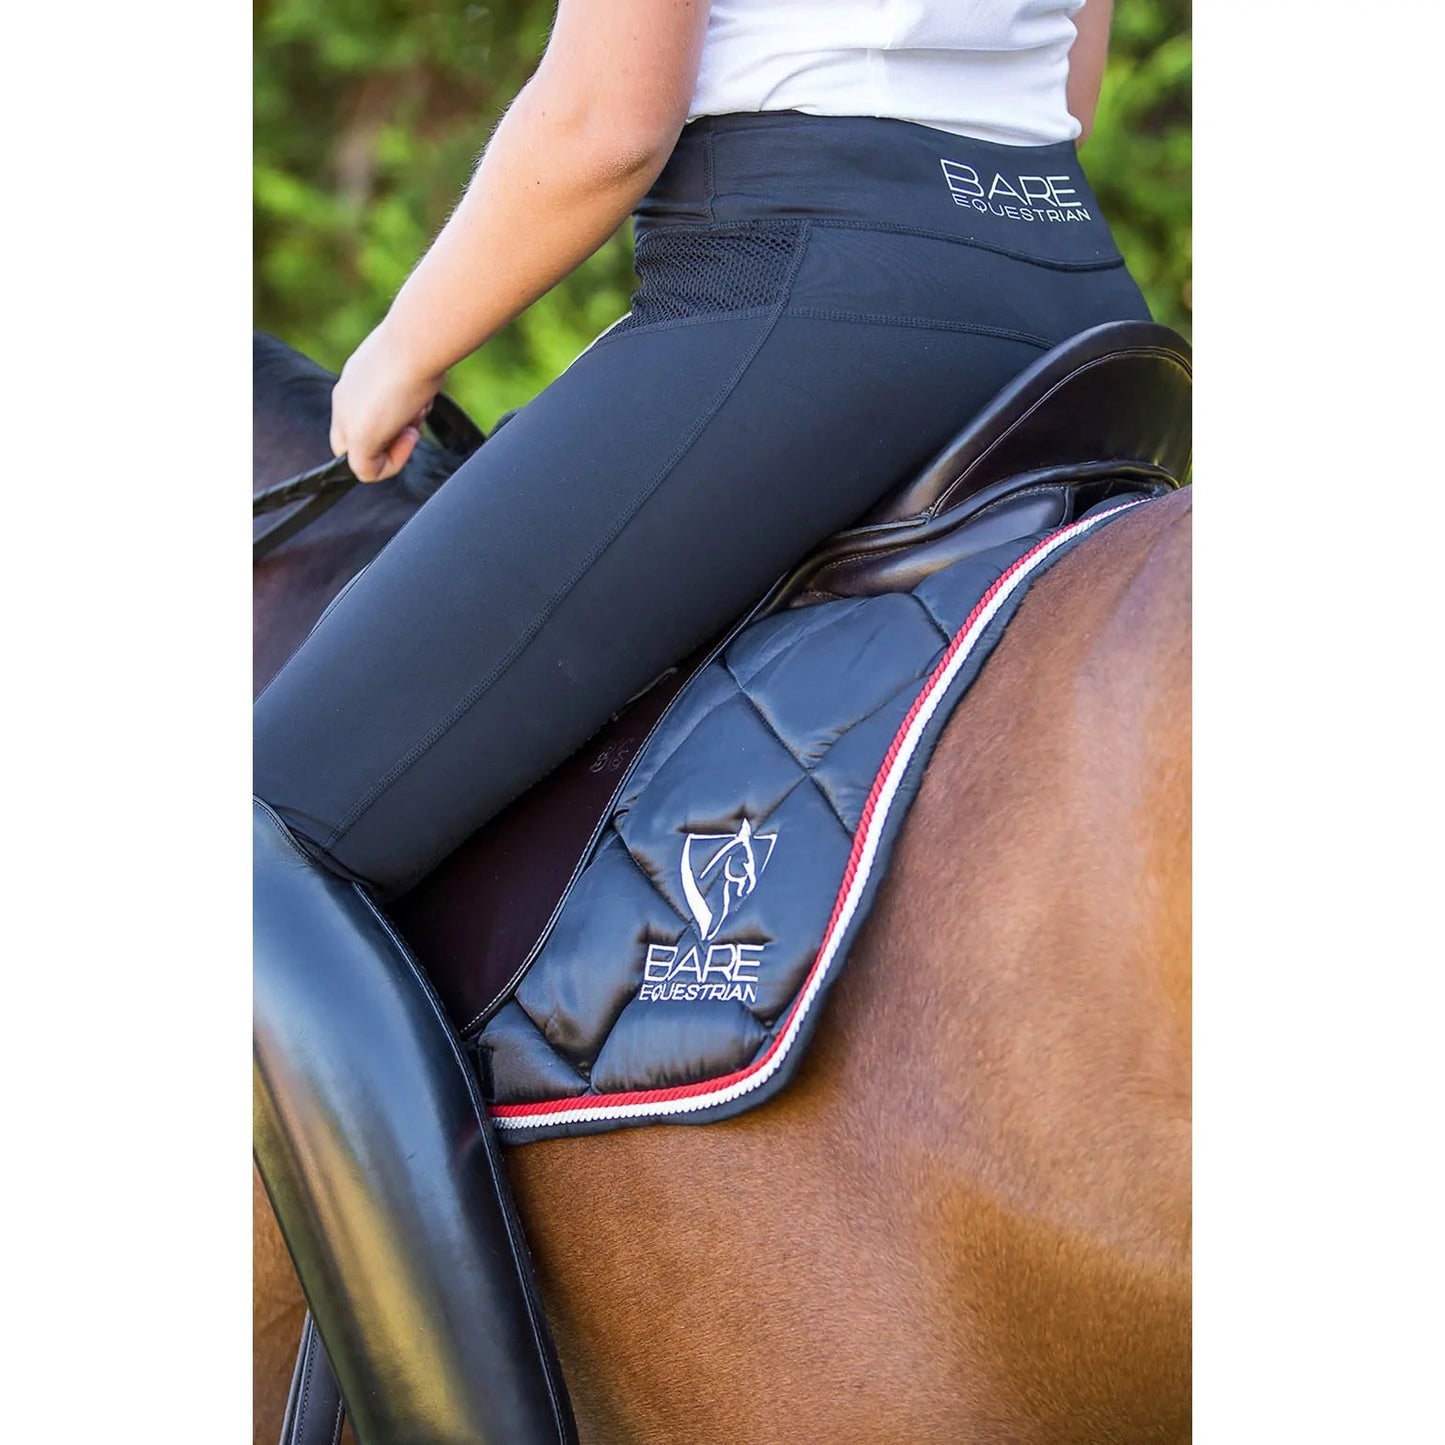 Rider wearing black horse riding tights on a brown horse.